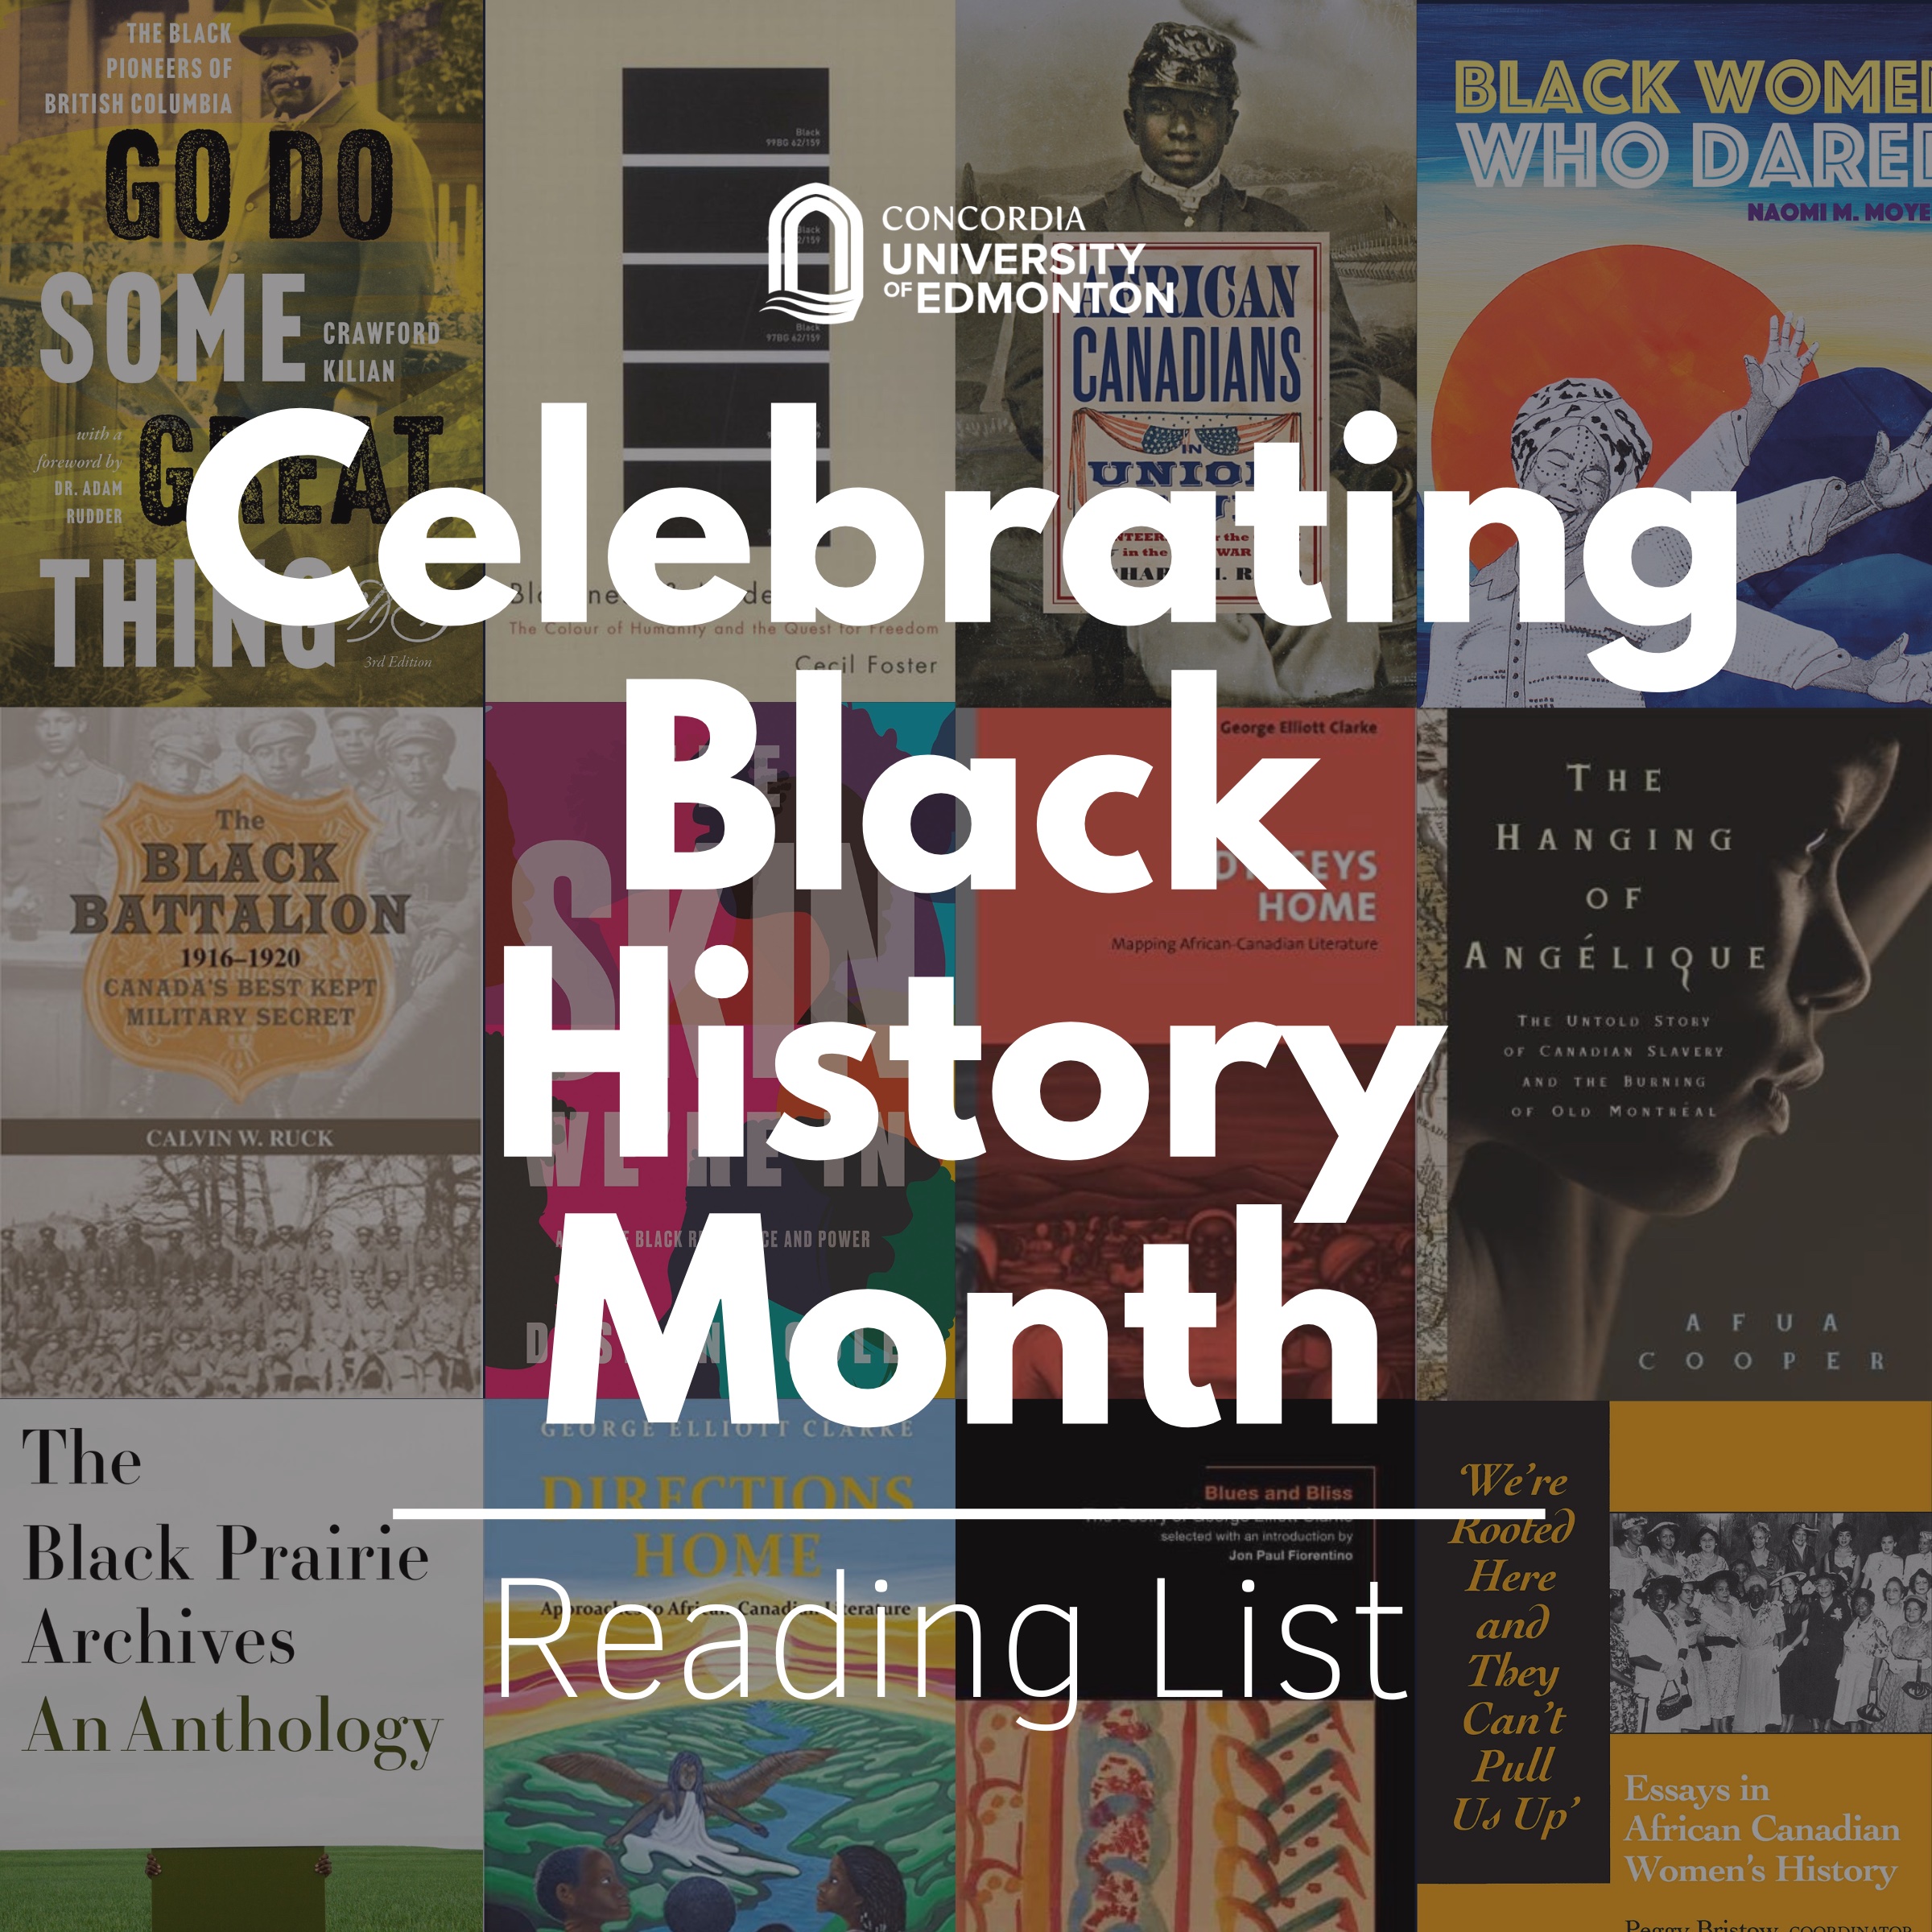 35 books to read during Black History Month